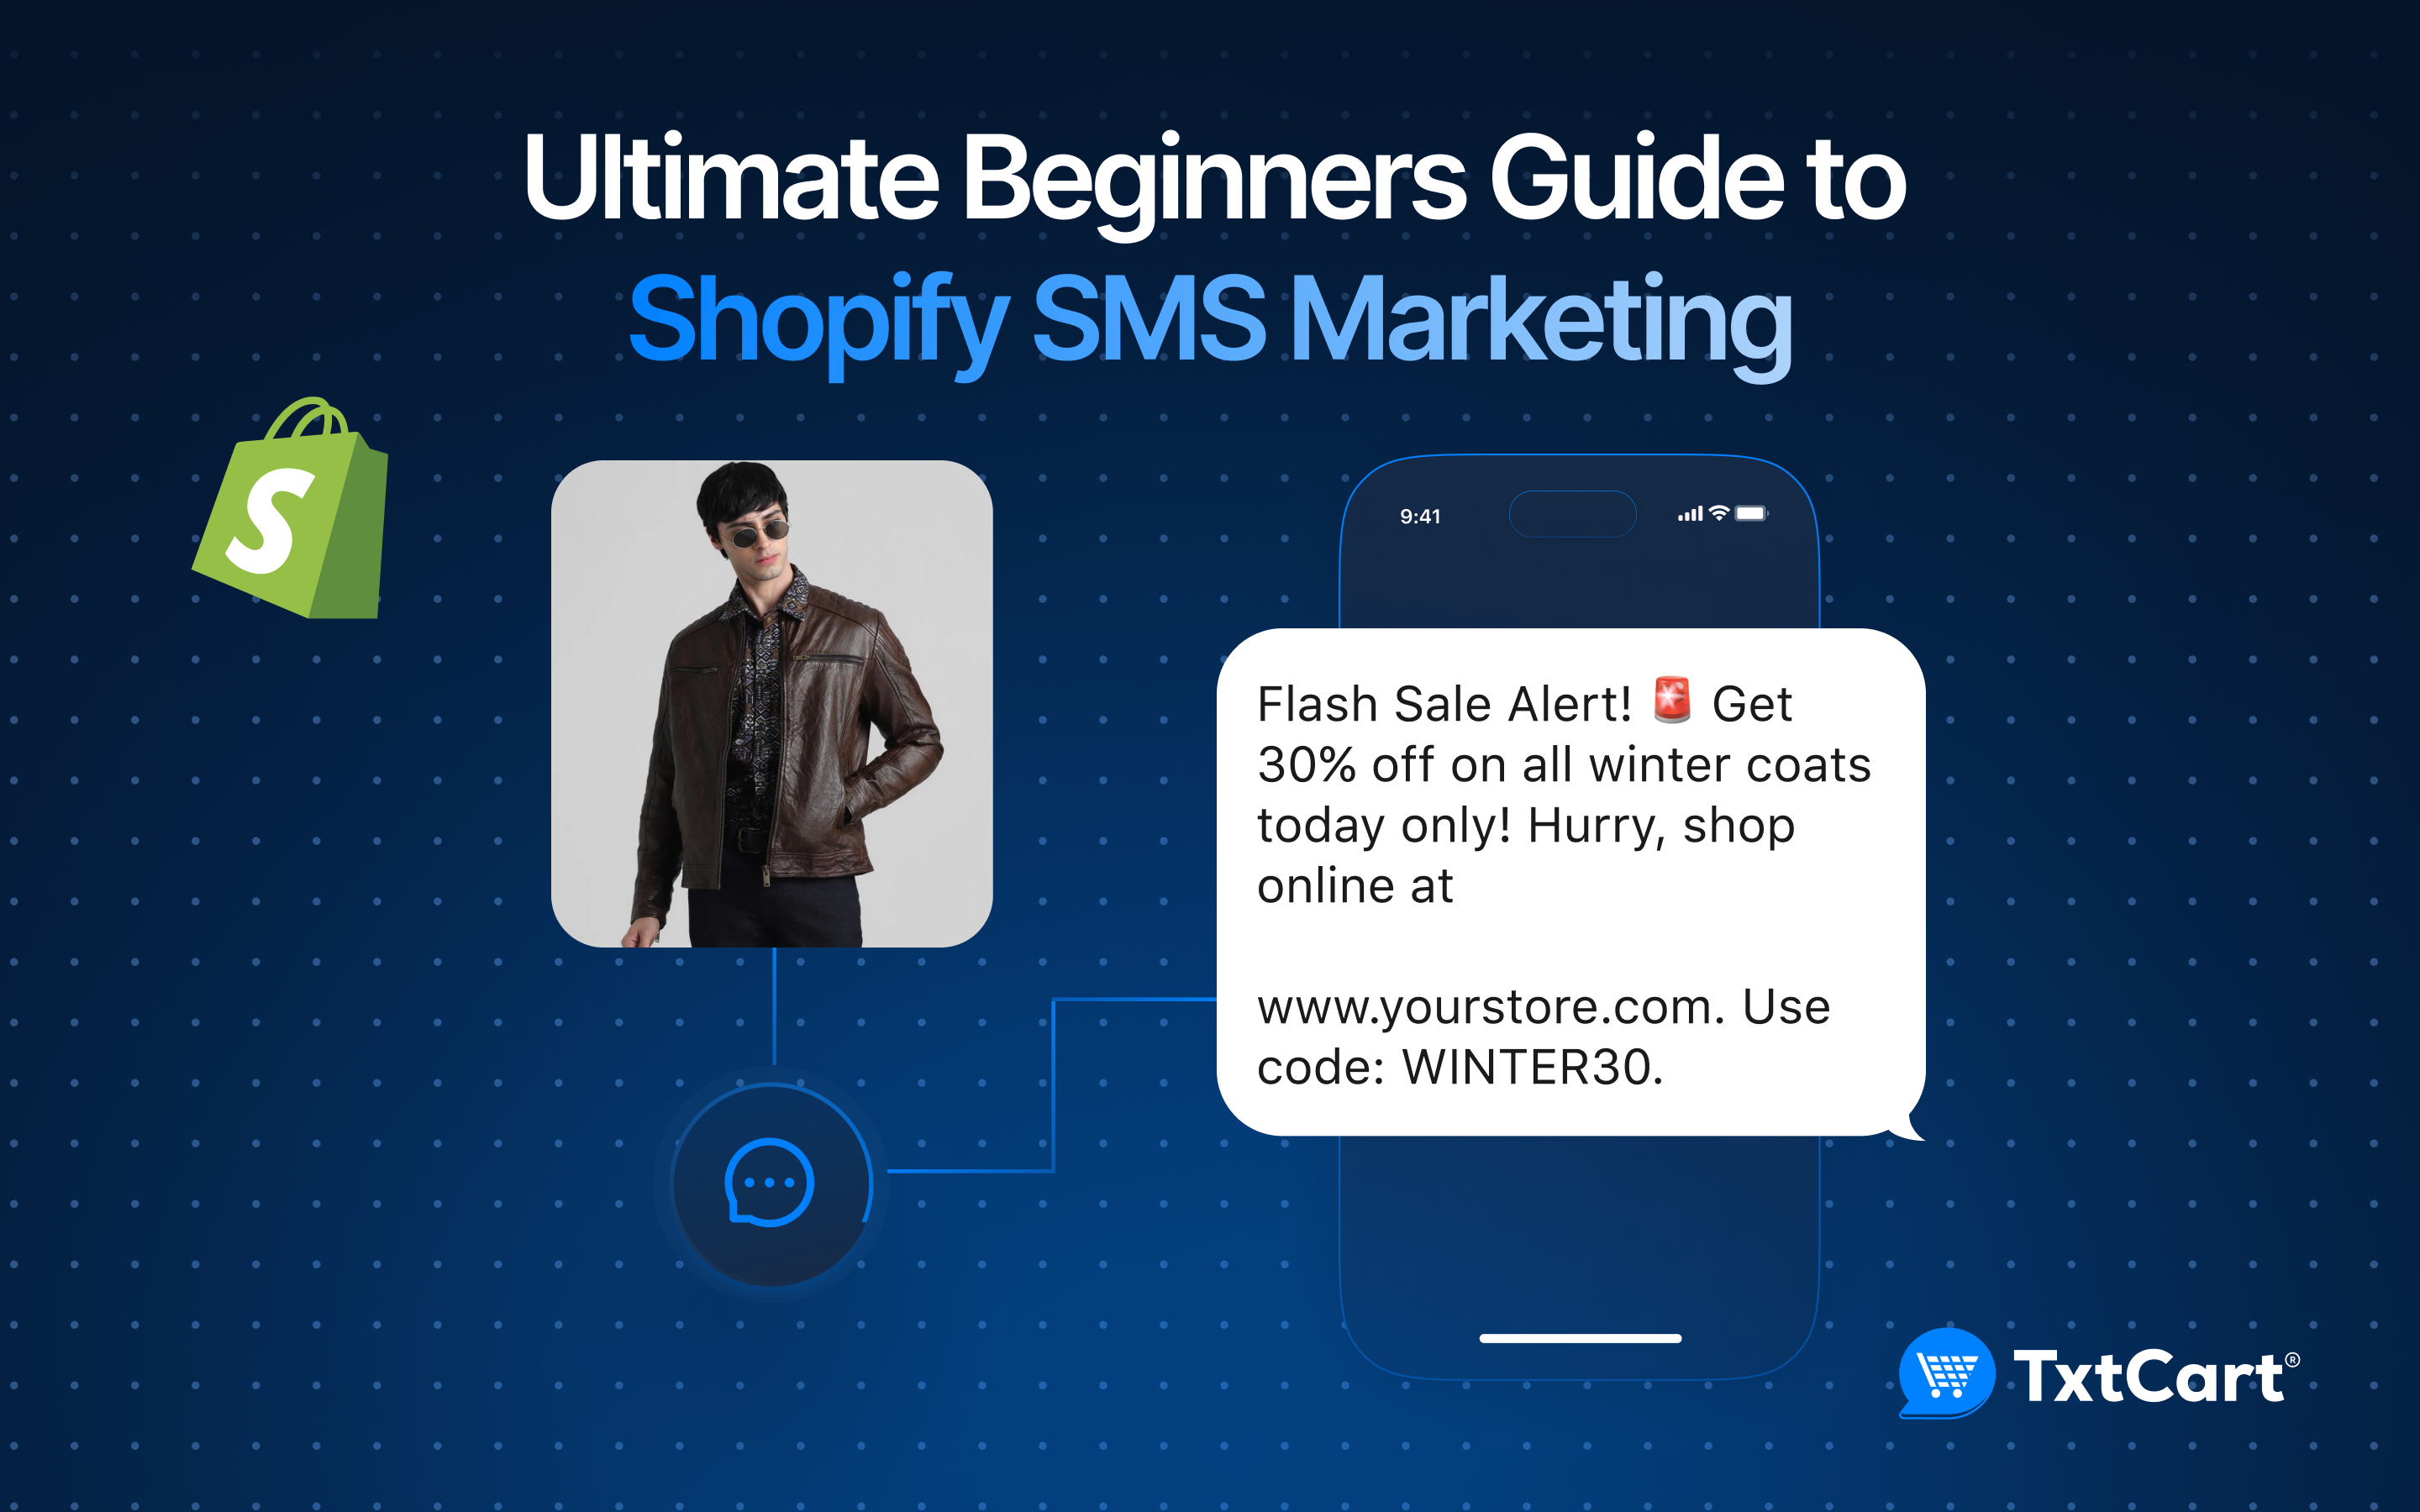 Ultimate Beginners Guide to Shopify SMS Marketing